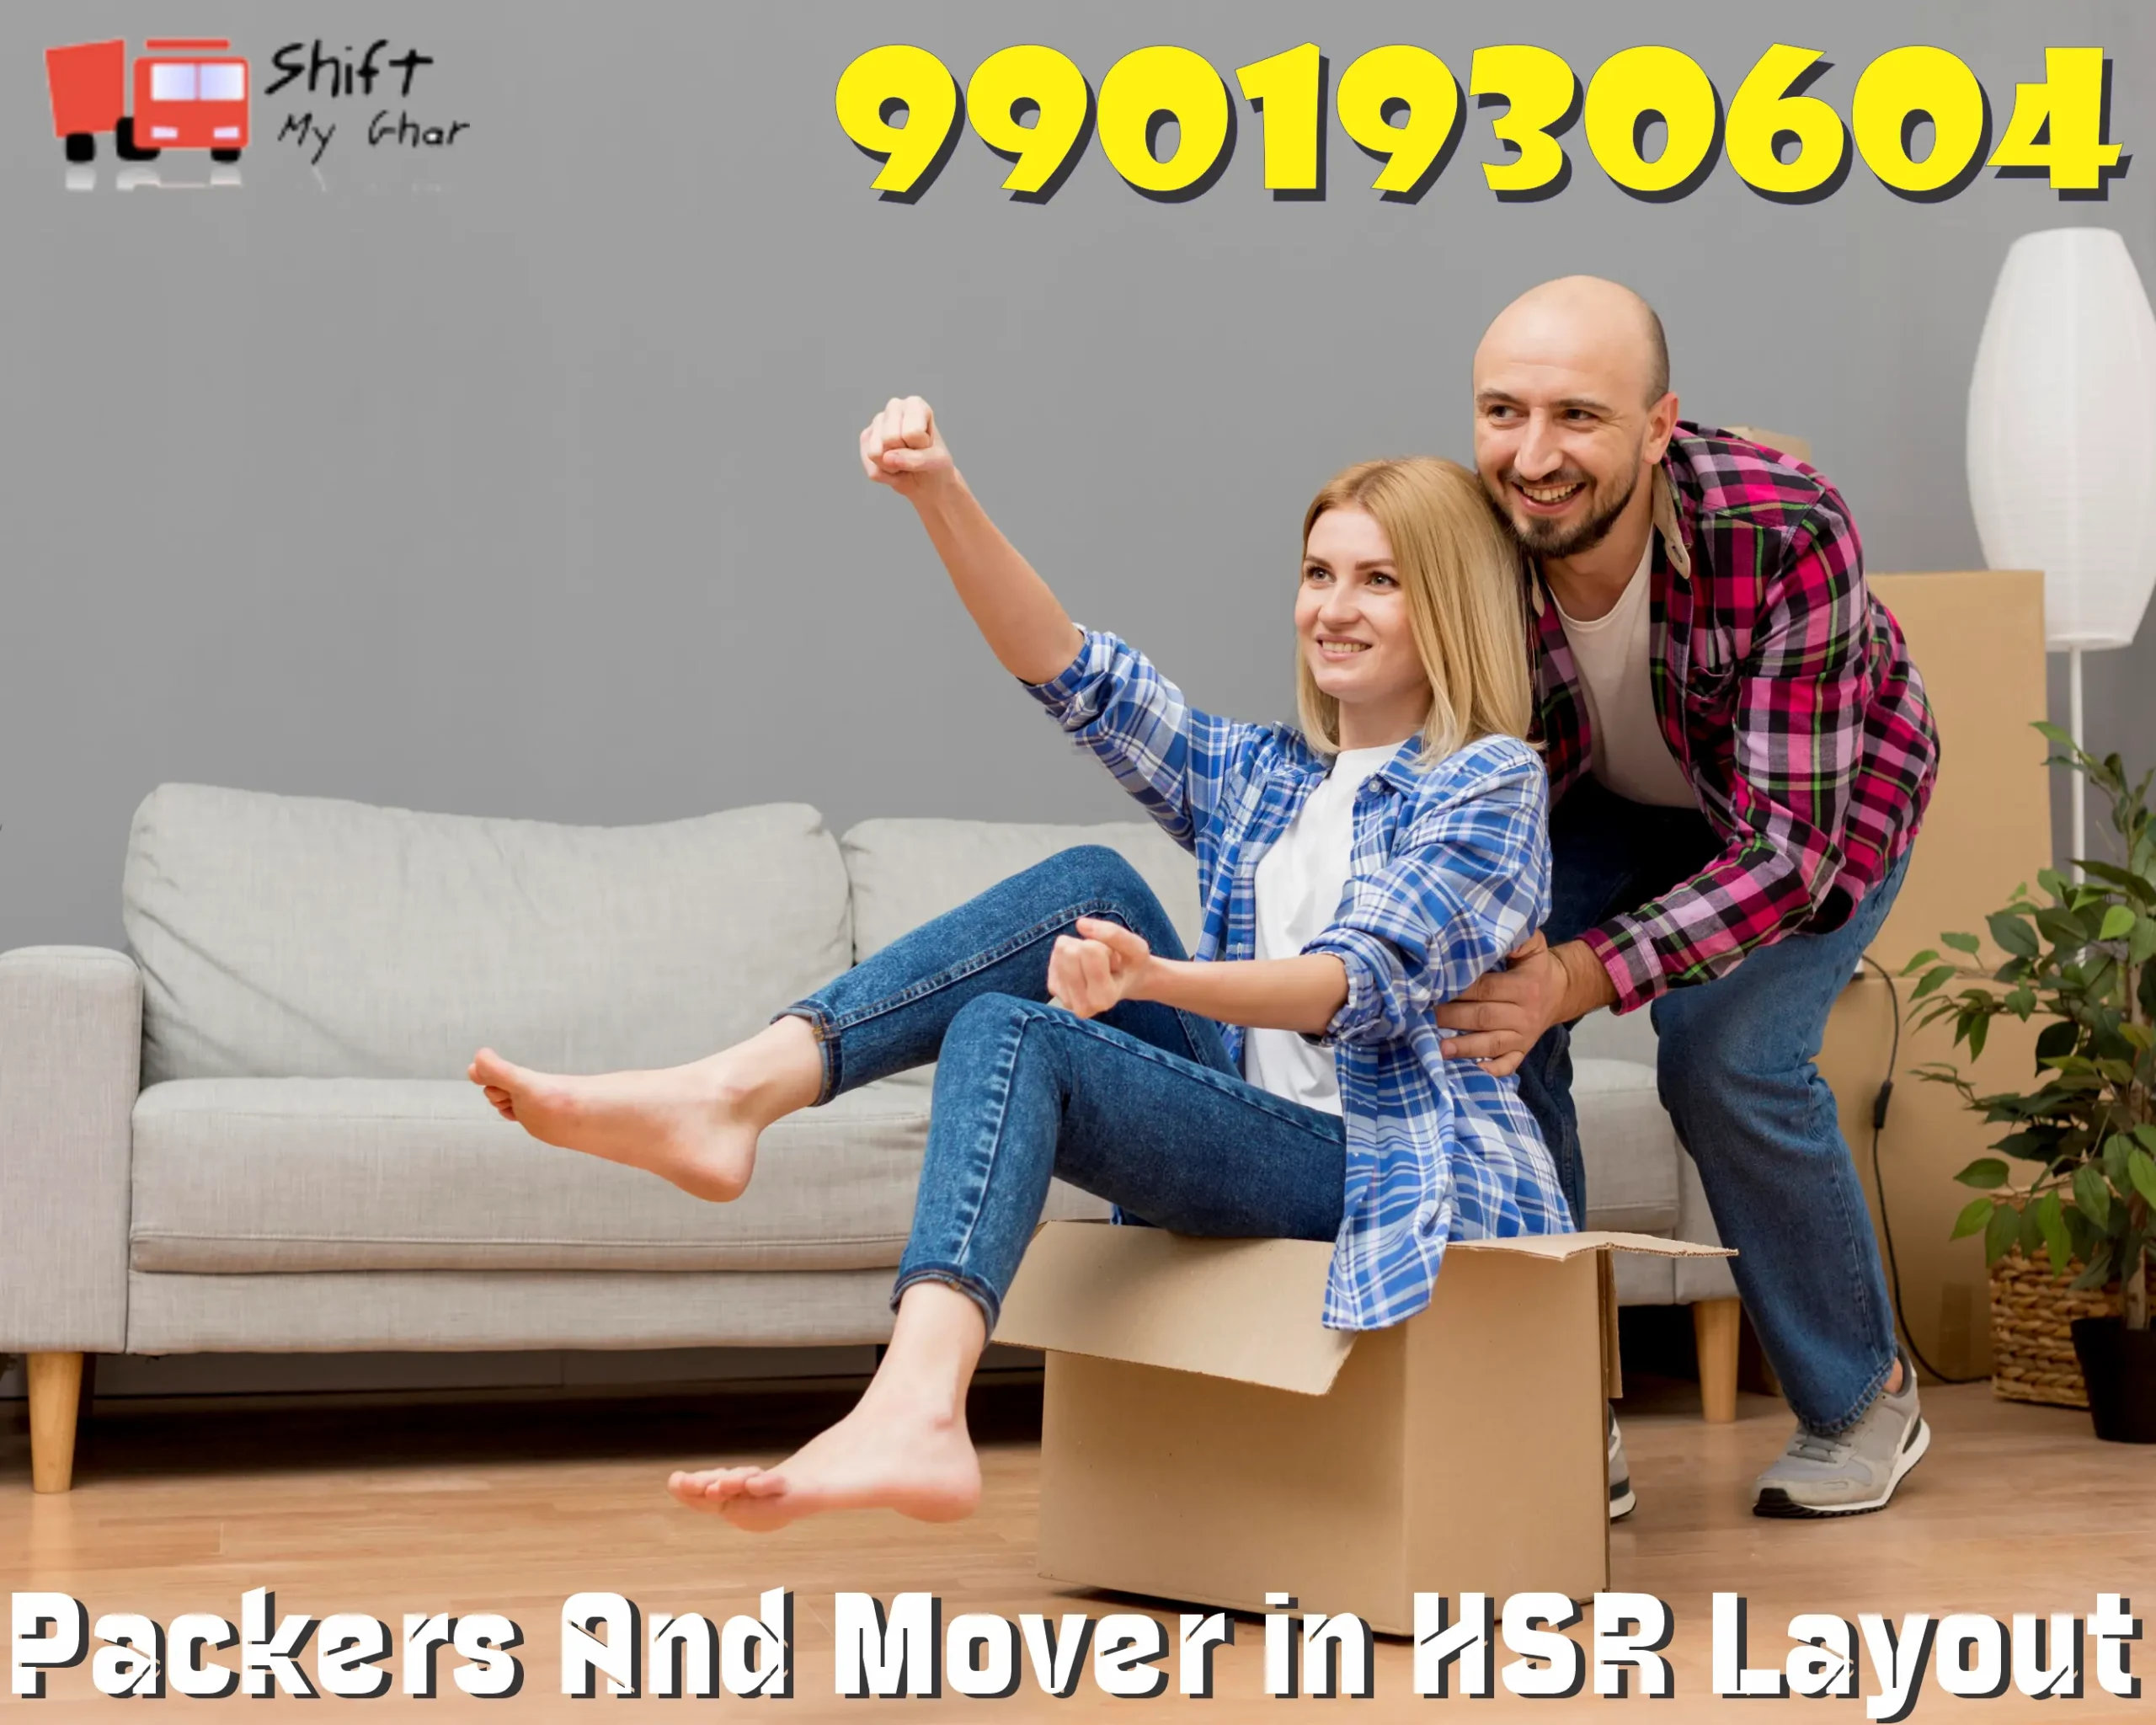 Packers and movers HSR Layout Shift my ghar